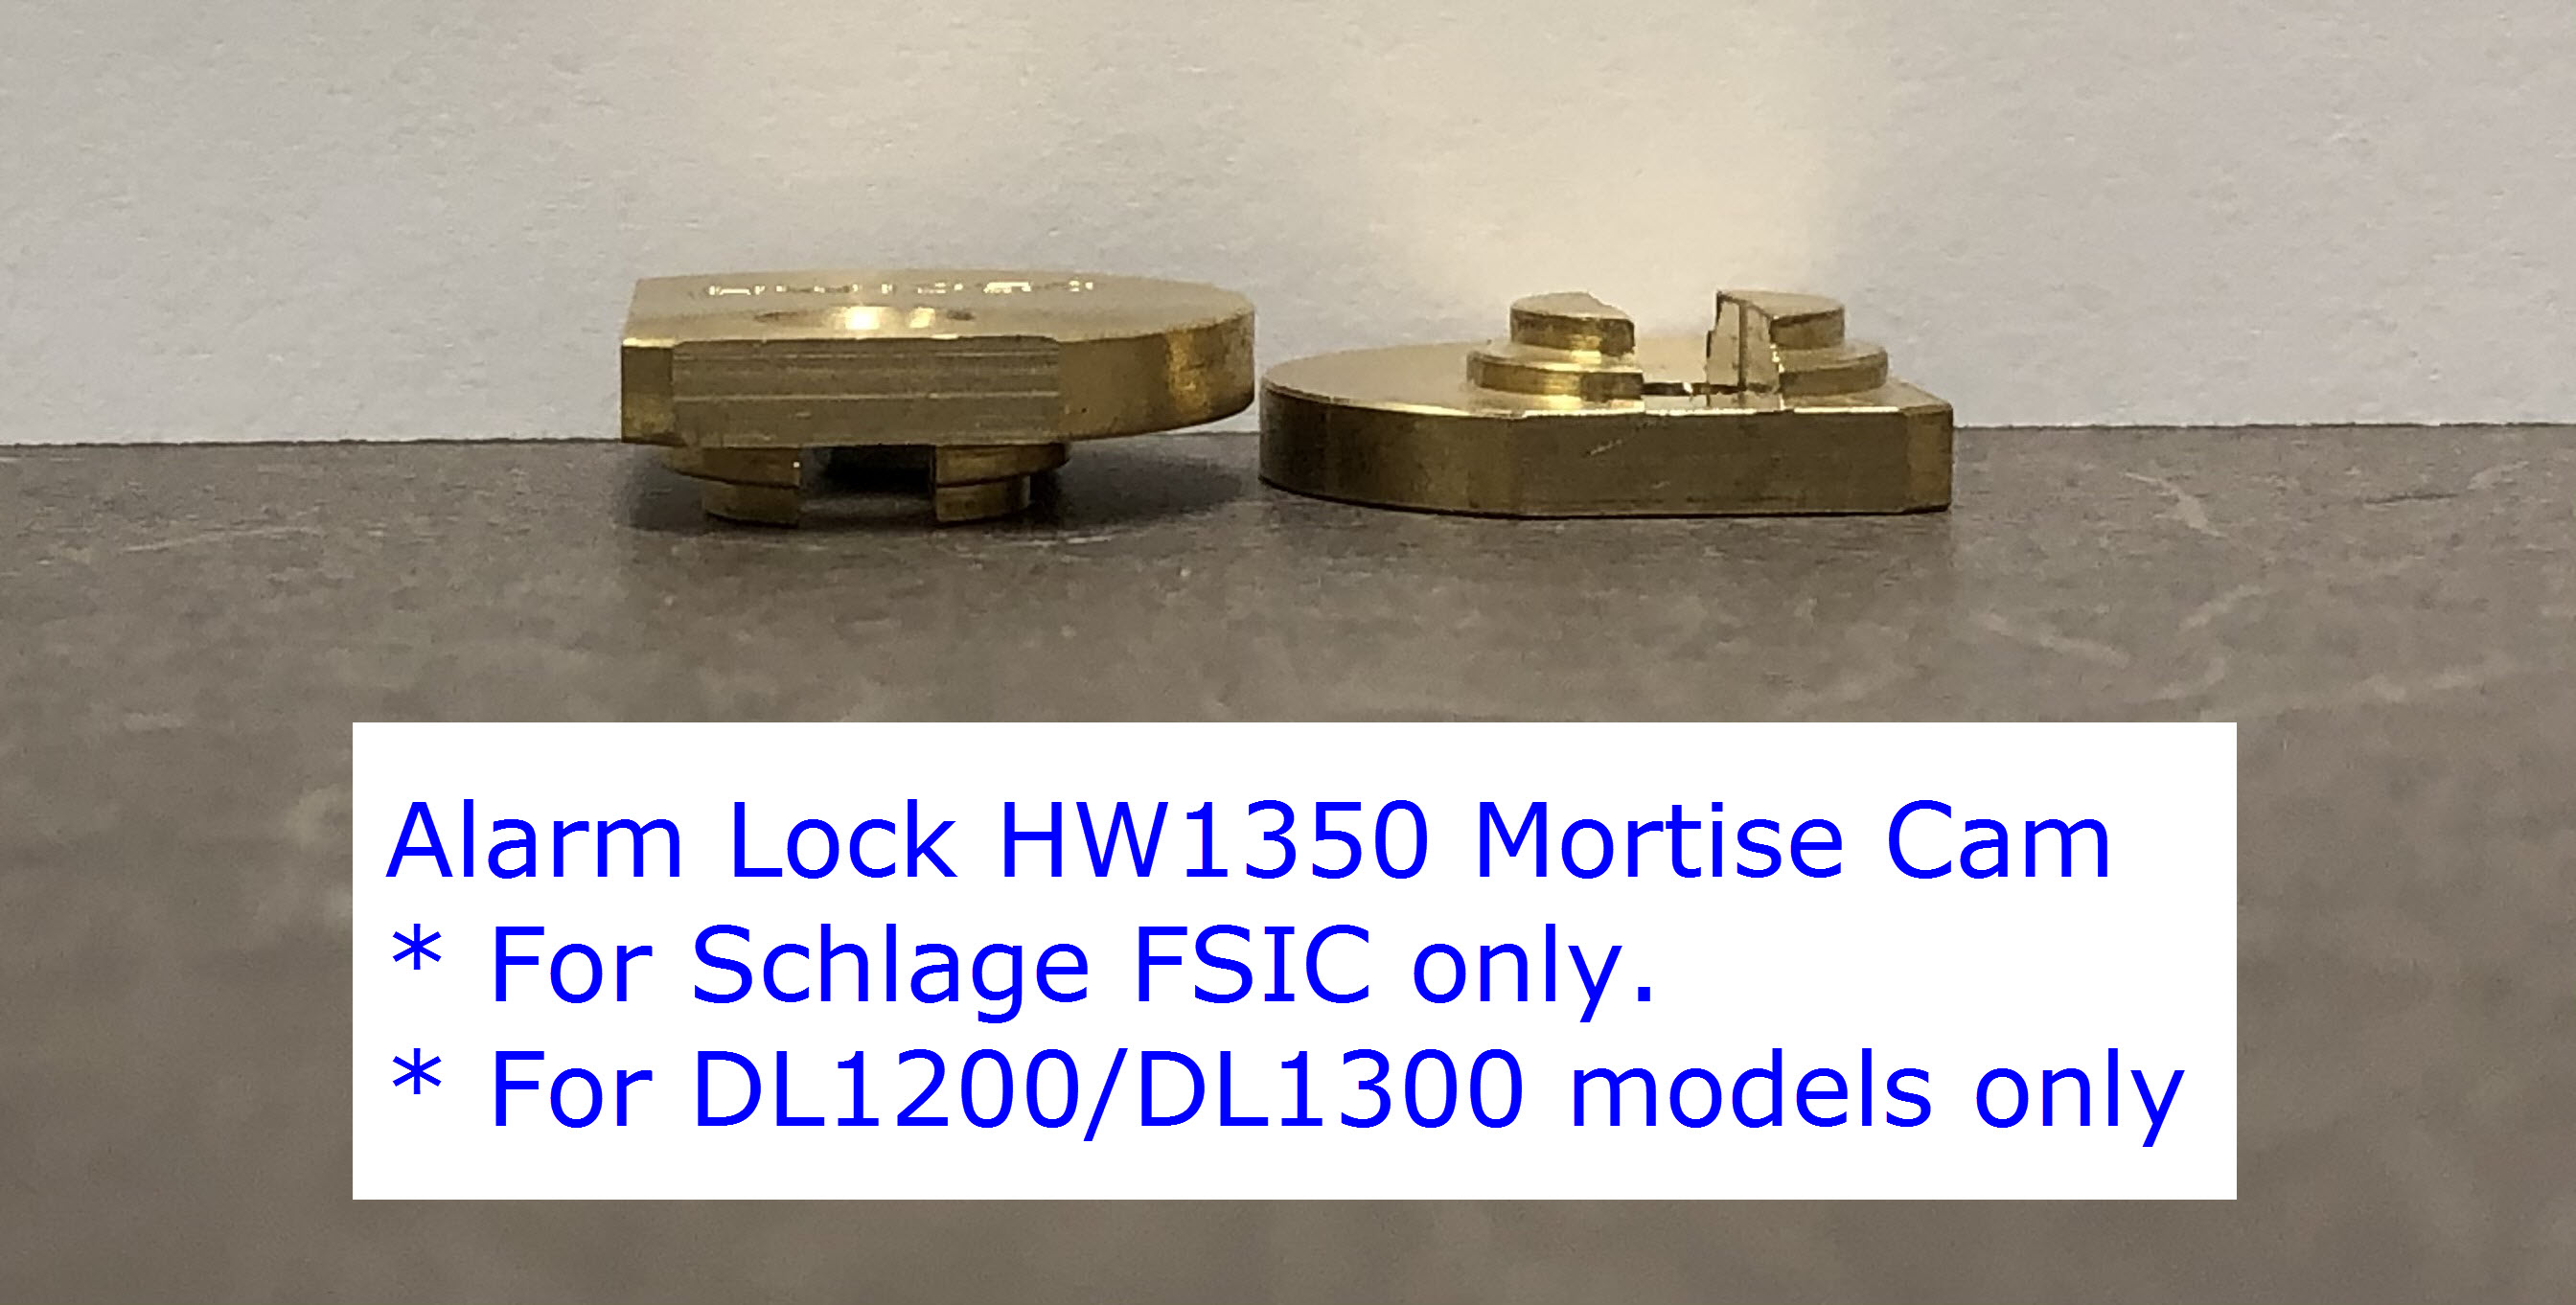 Alarm Lock DL1300 mortise cyl. cams HW1350 for Schlage FSIC only